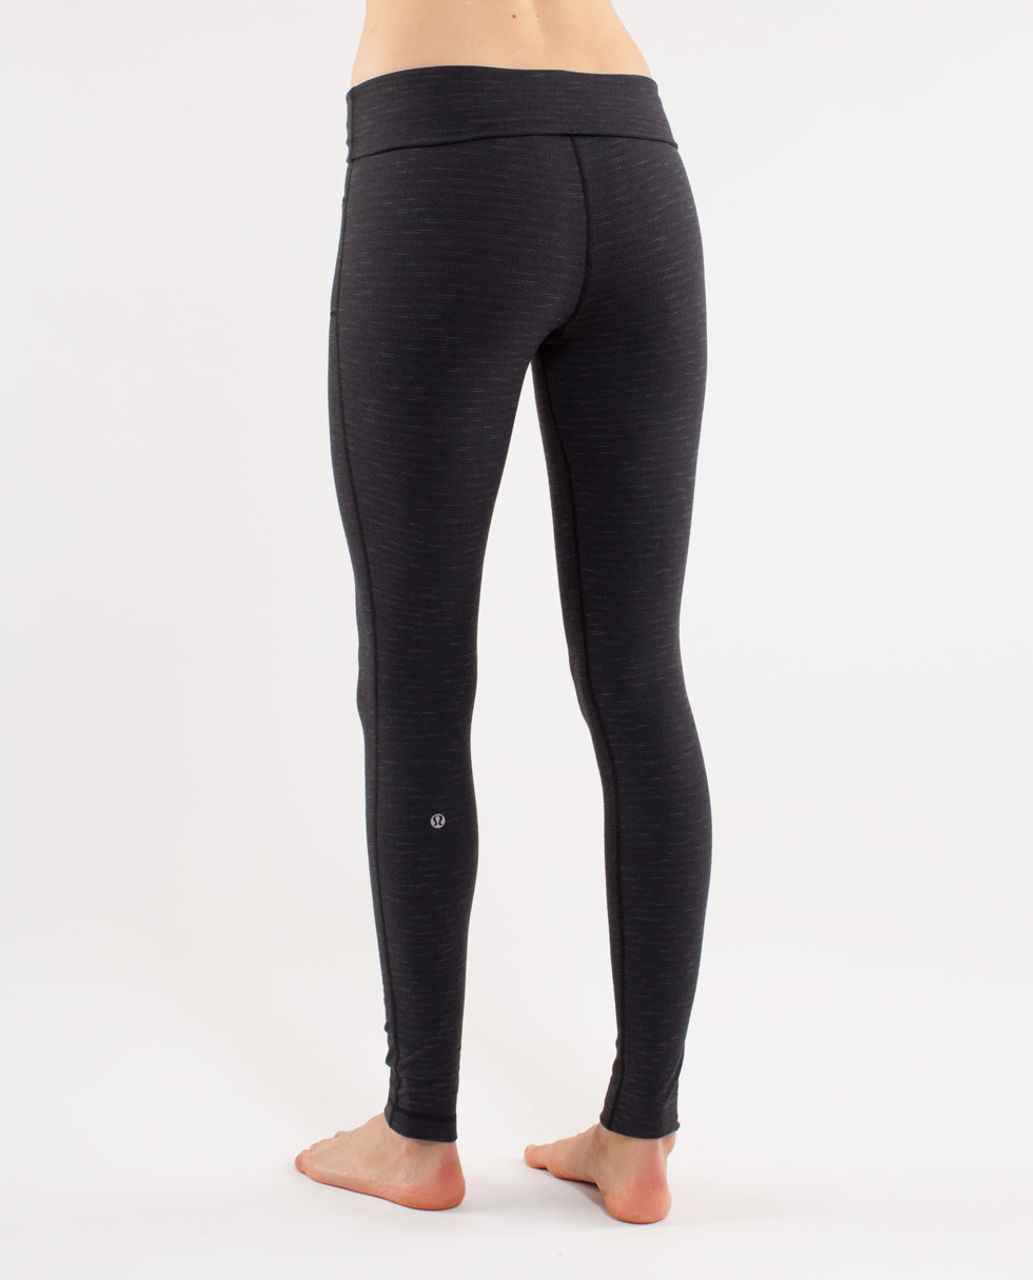 Lululemon Skinny Will Pant size 2 Pique Luon Black NWT High / Low Rise  Legging 